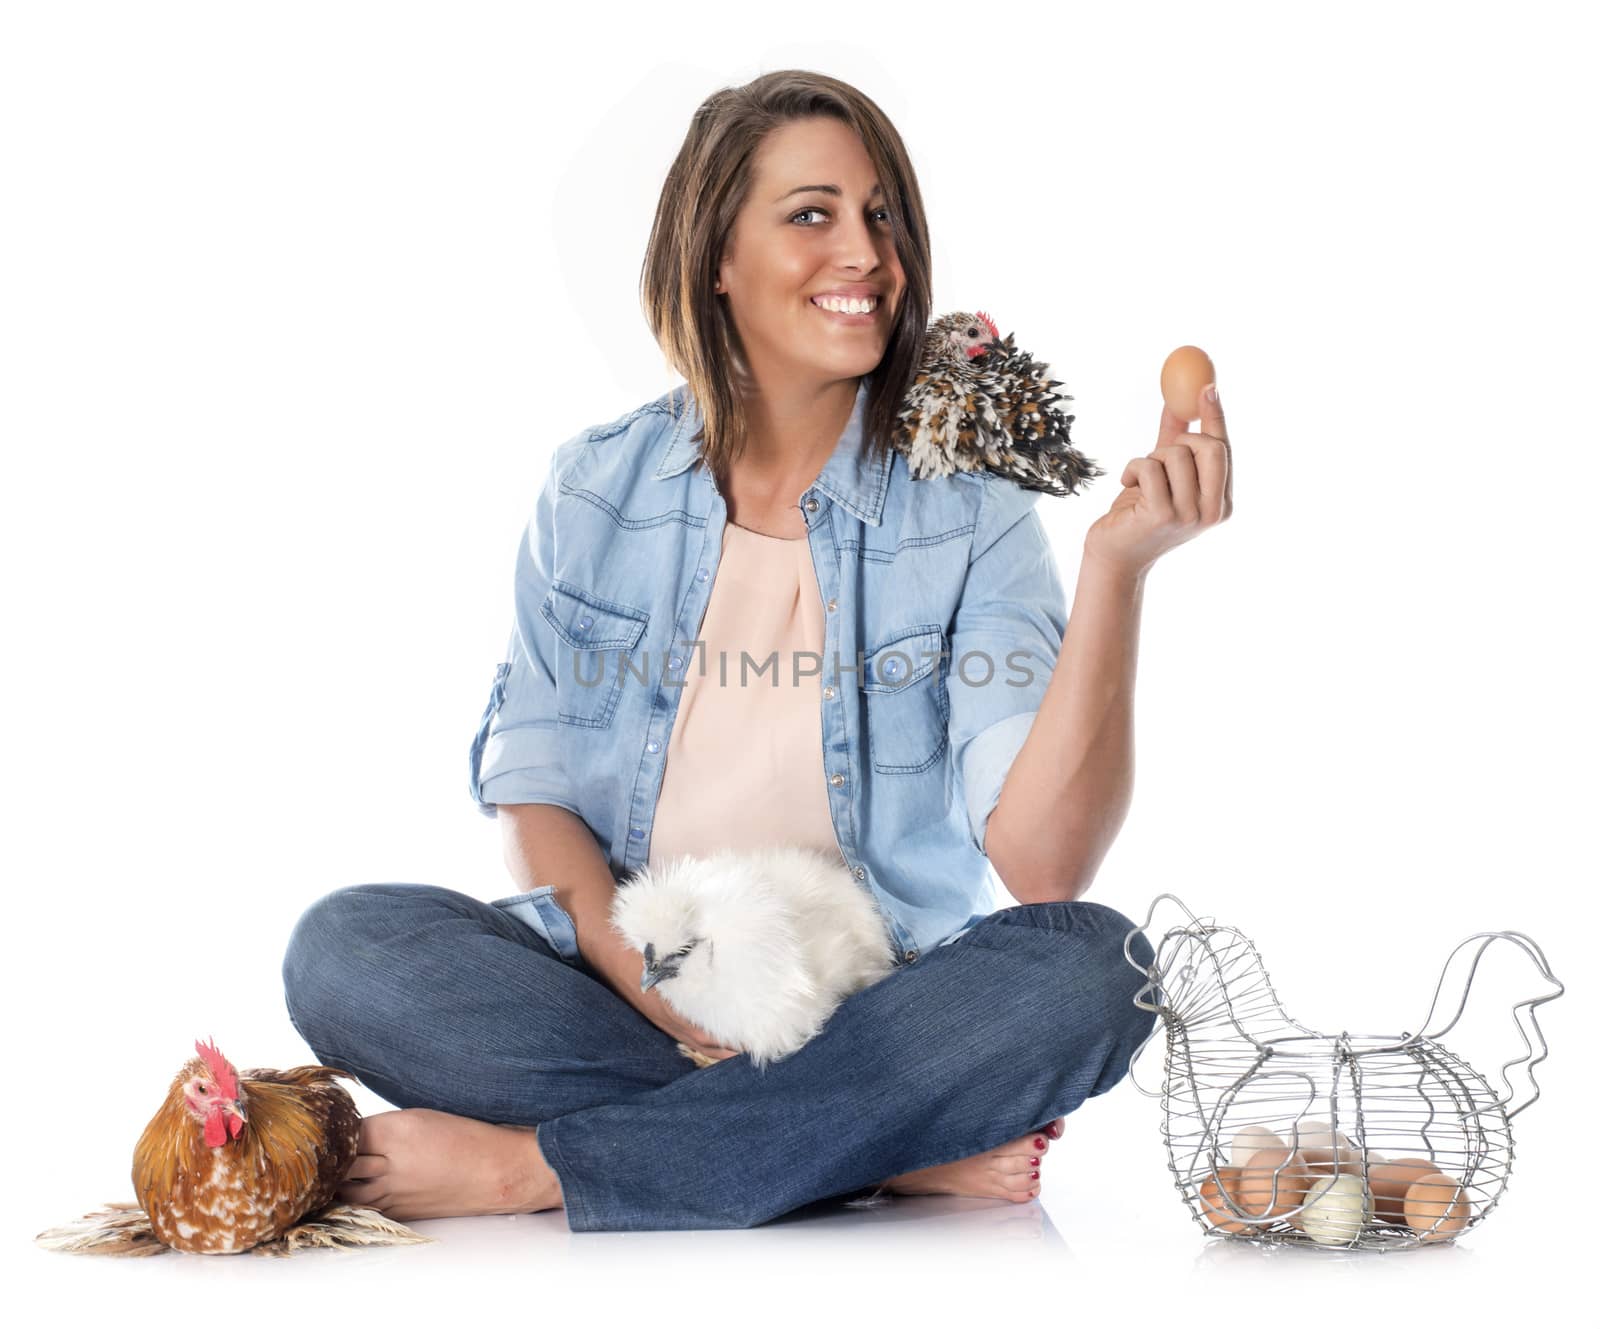 young woman and chicken by cynoclub